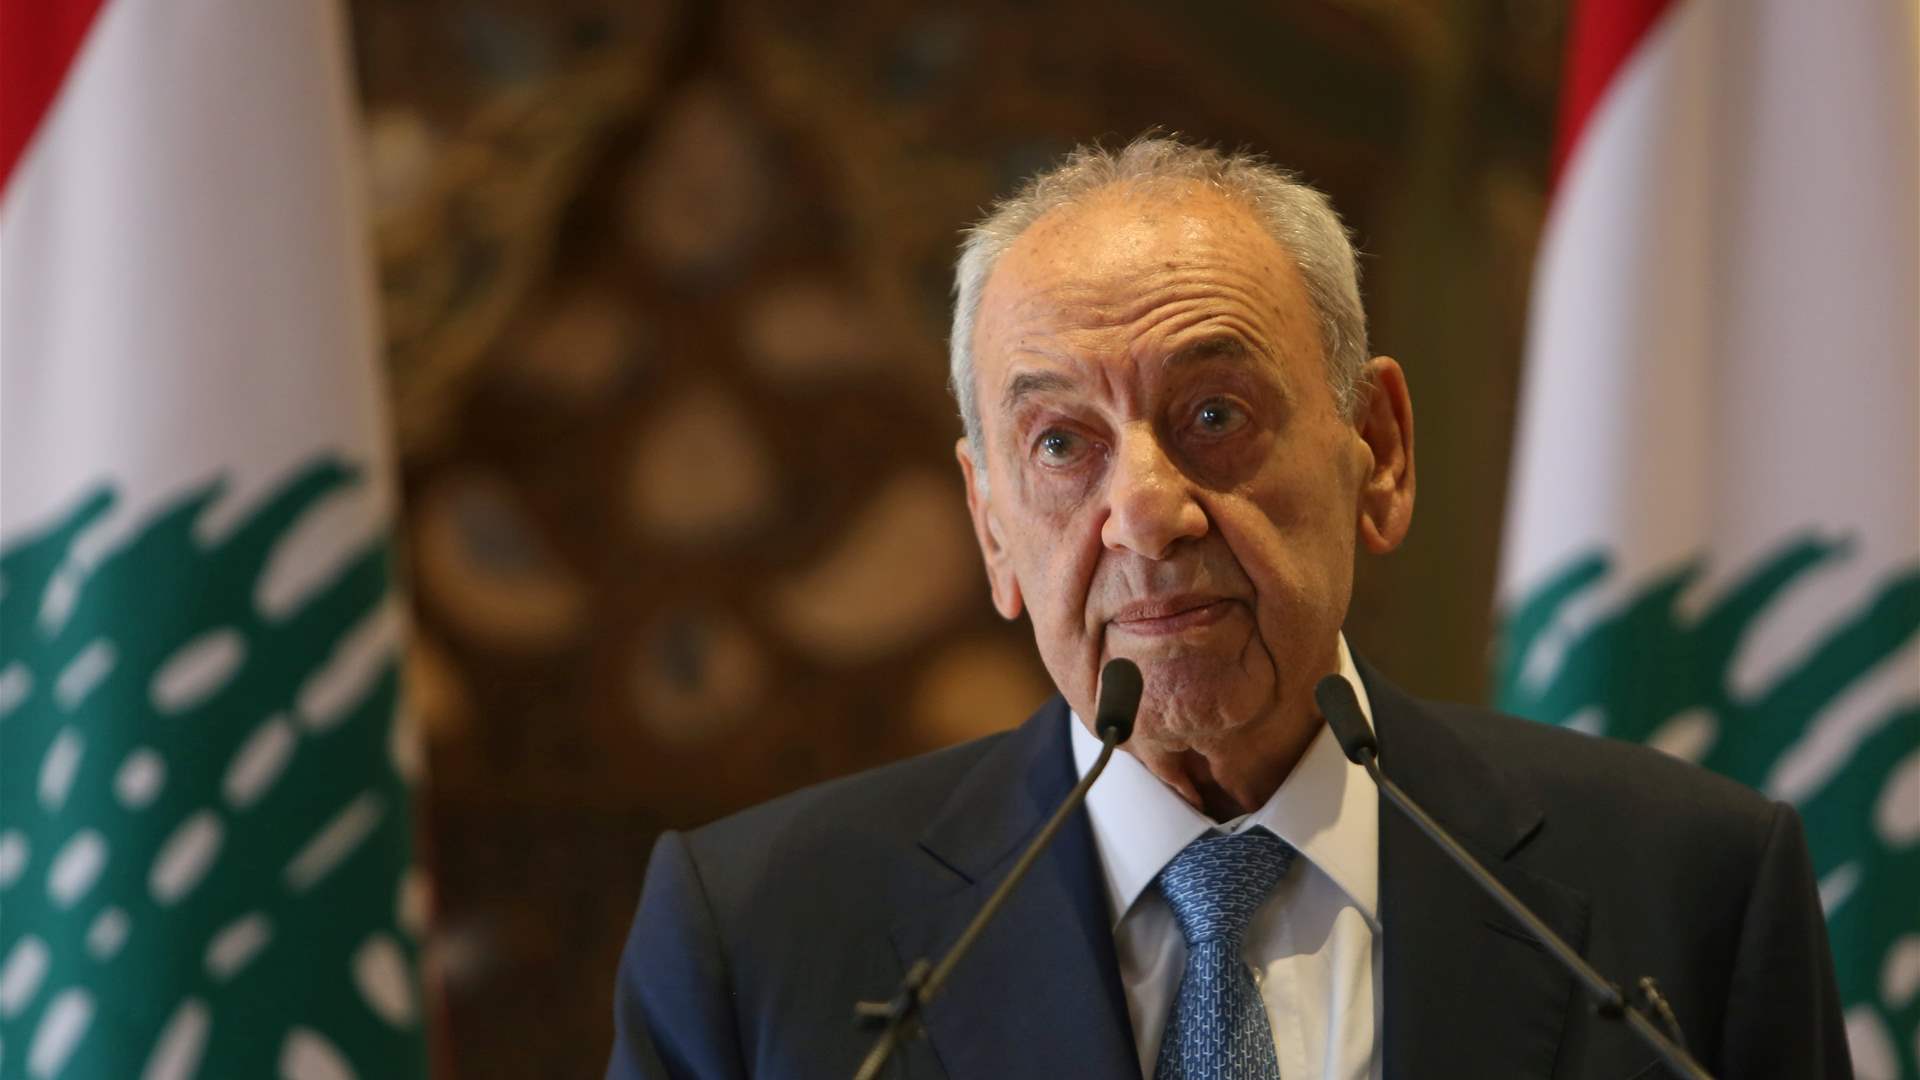 Berri&#39;s &#39;reciprocal approach&#39;: Quintet Committee&#39;s supportive but no mention of a third presidential option